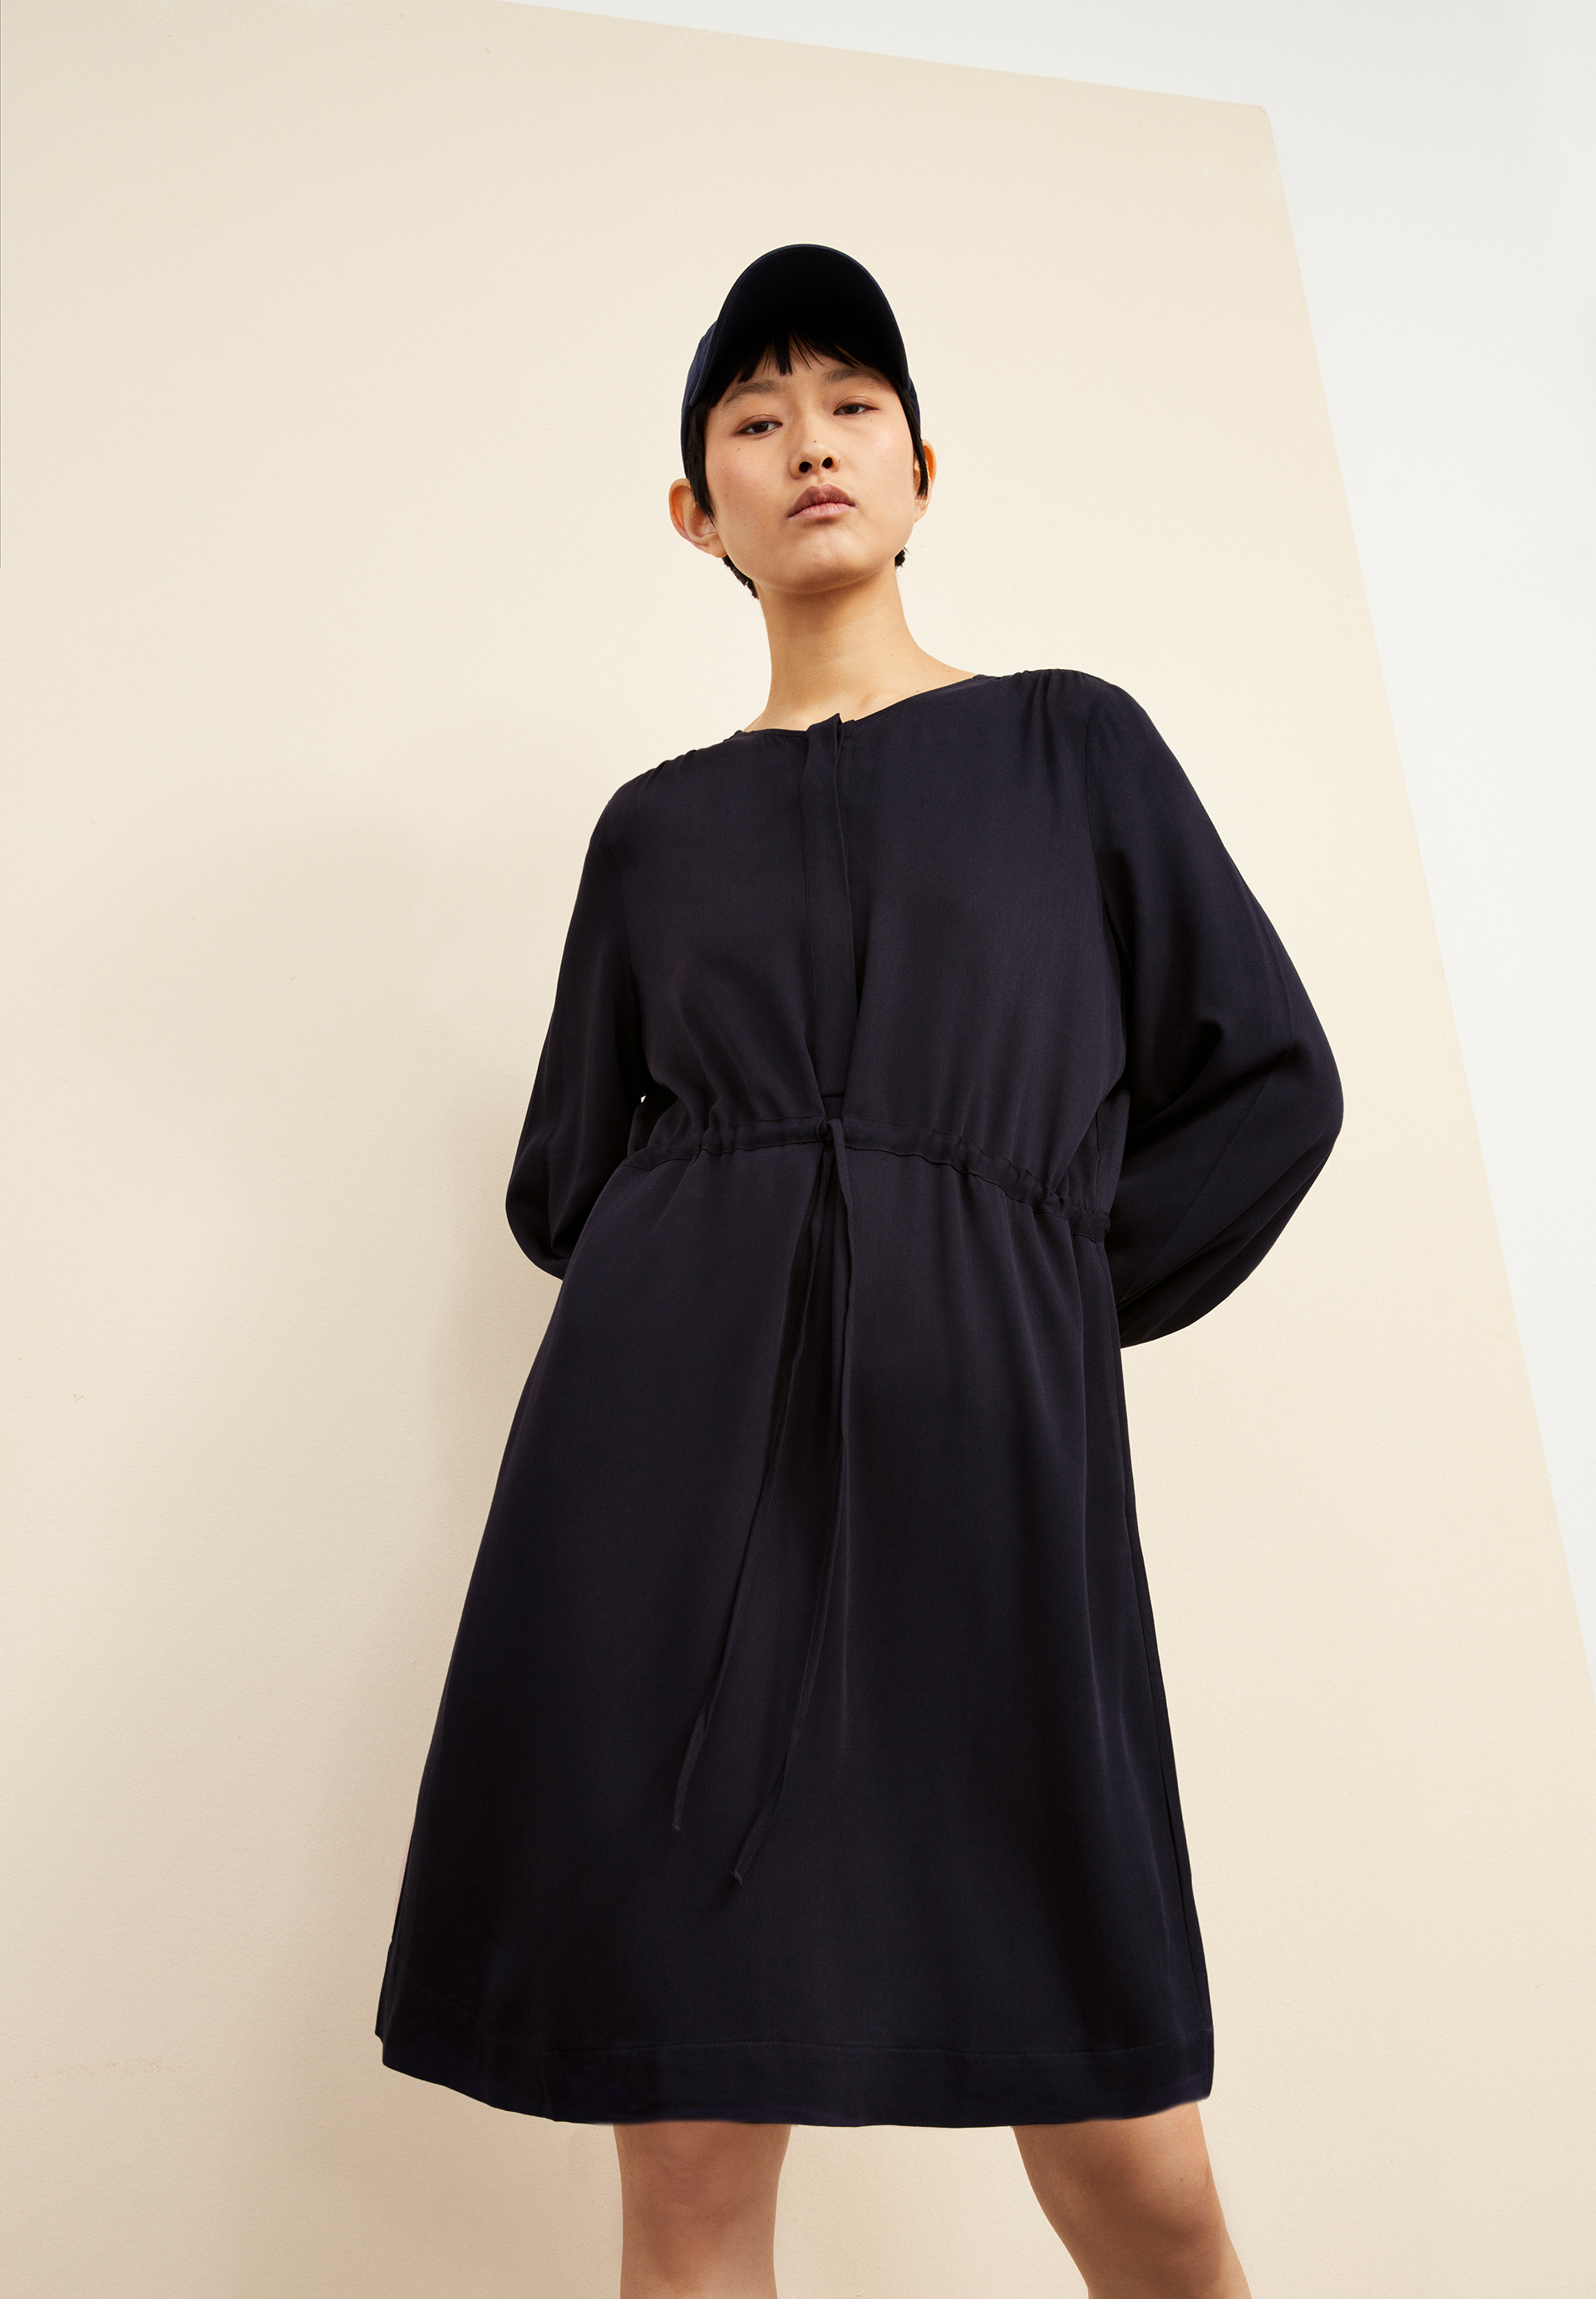 MALVINAA Woven Dress Relaxed Fit made of LENZING™ ECOVERO™ Viscose